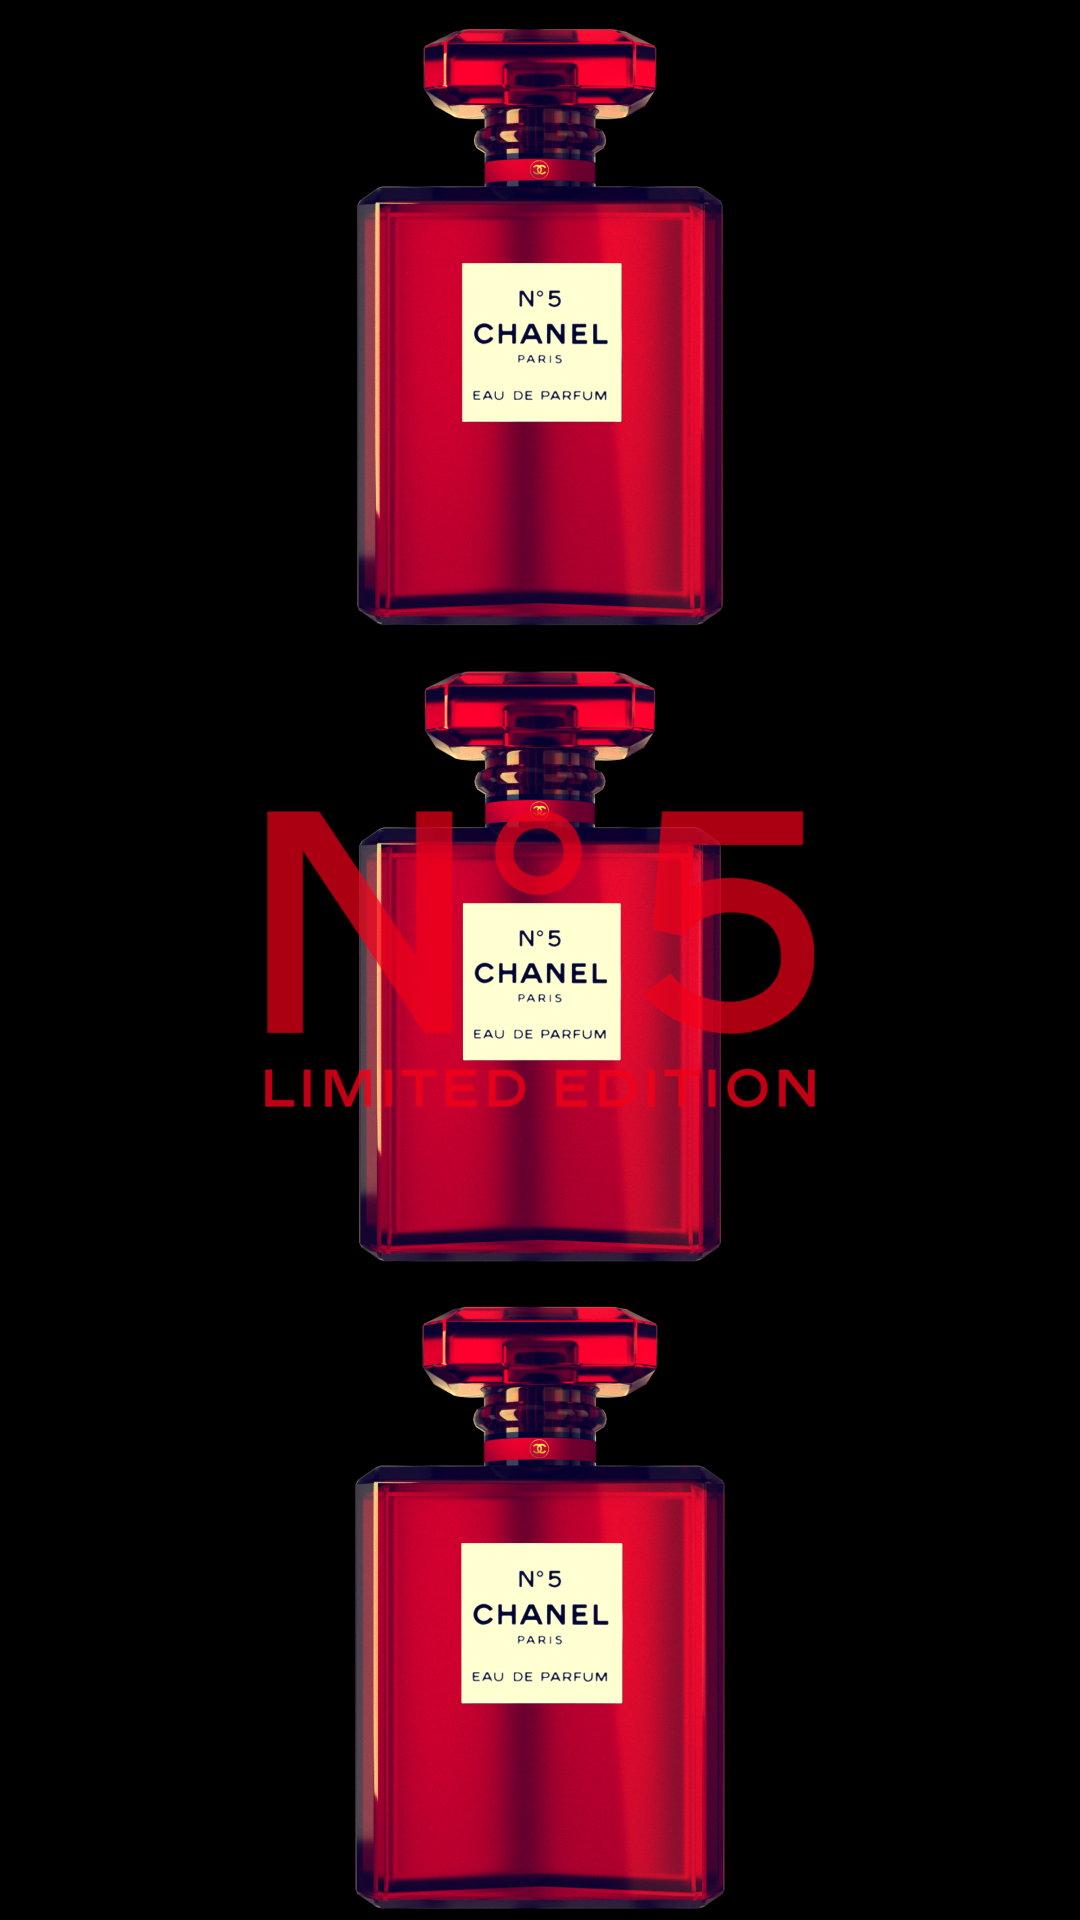 Chanel Perfume Bottle Isolated on Red & Blue Background. Bottle with Coco Chanel  Perfume Product. Editorial Image - Image of abstract, fragrance: 182869665